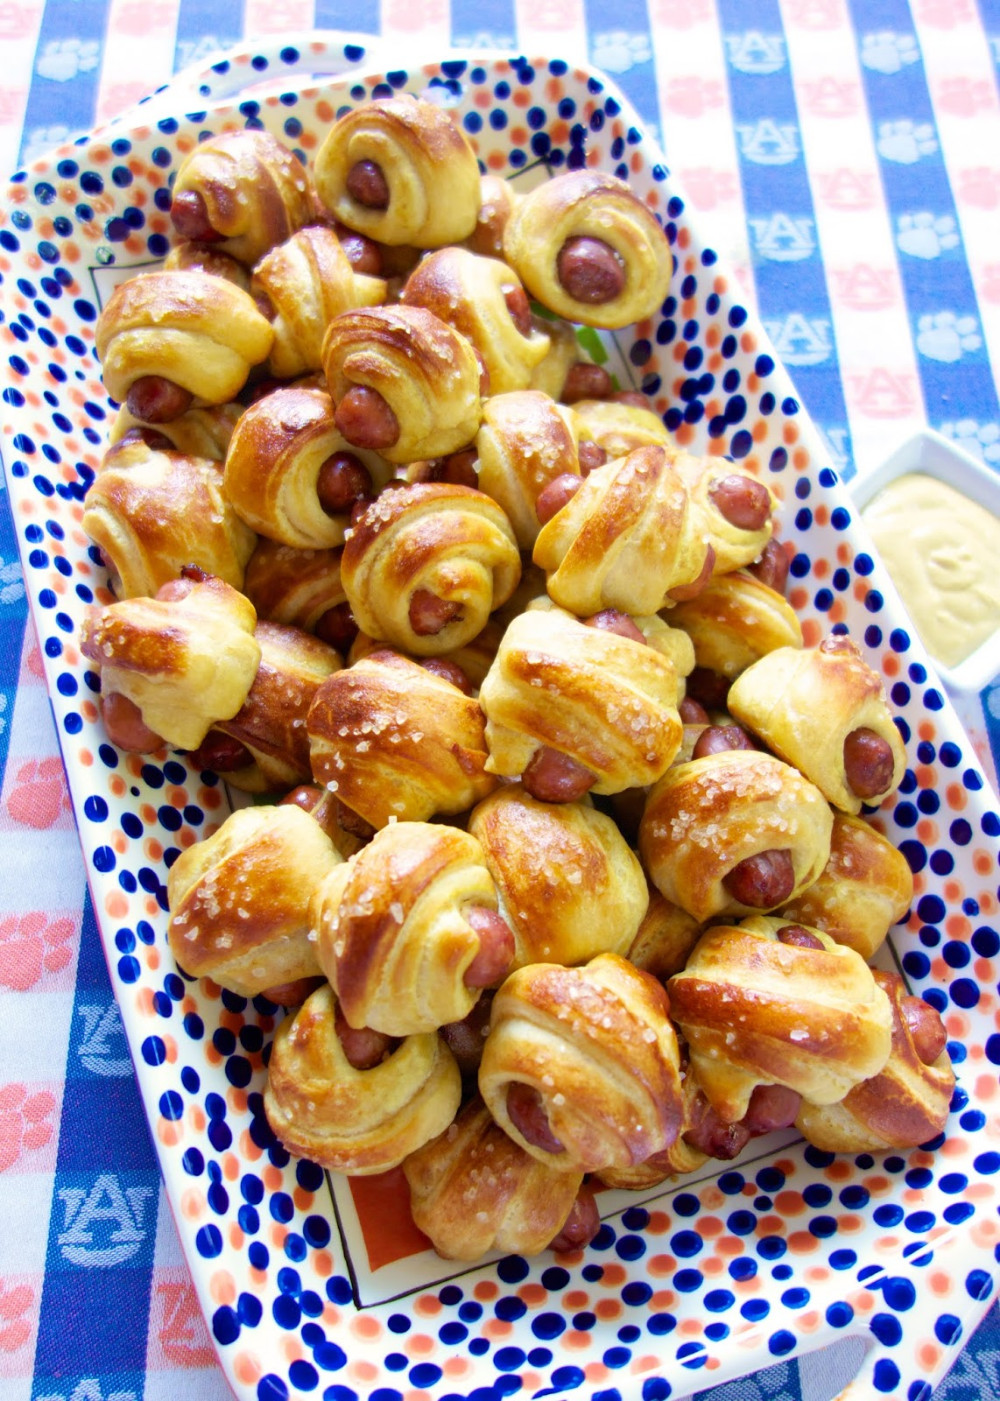 Pillsbury Super Bowl Recipes
 Pin by Delia Dunsmore on appetizers